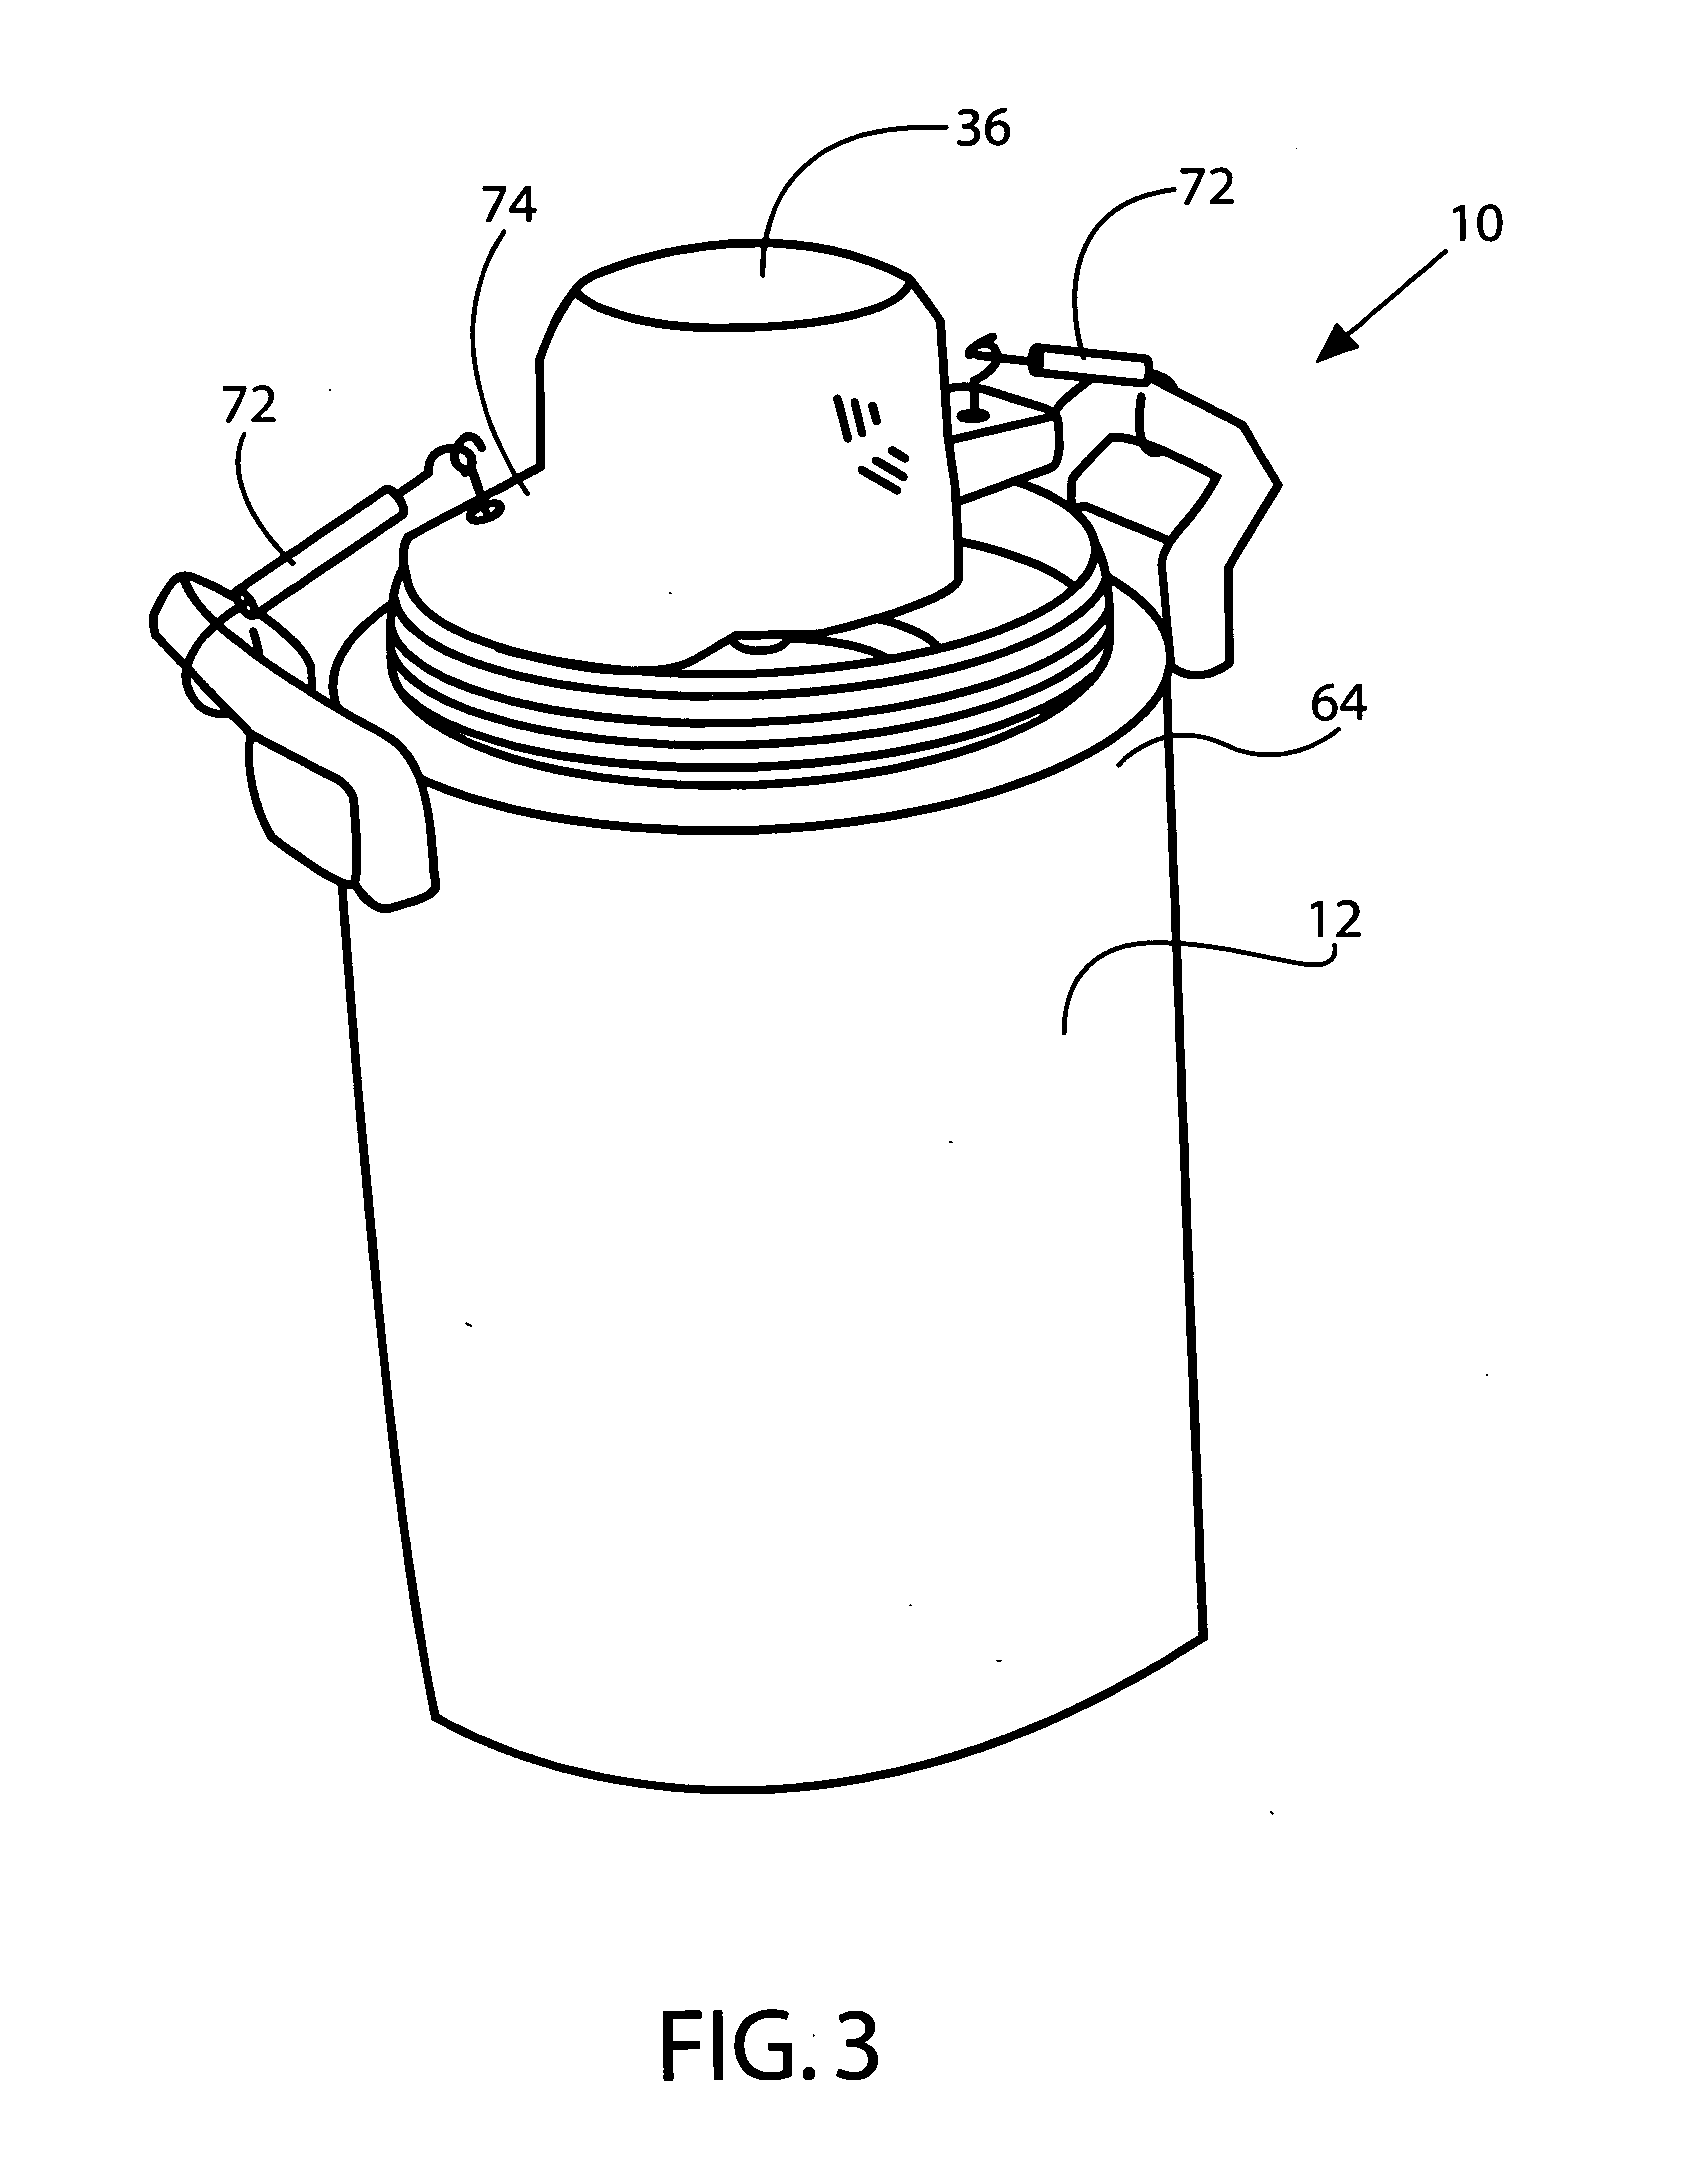 Apparatus for making, storing, and transporting frozen confections and method